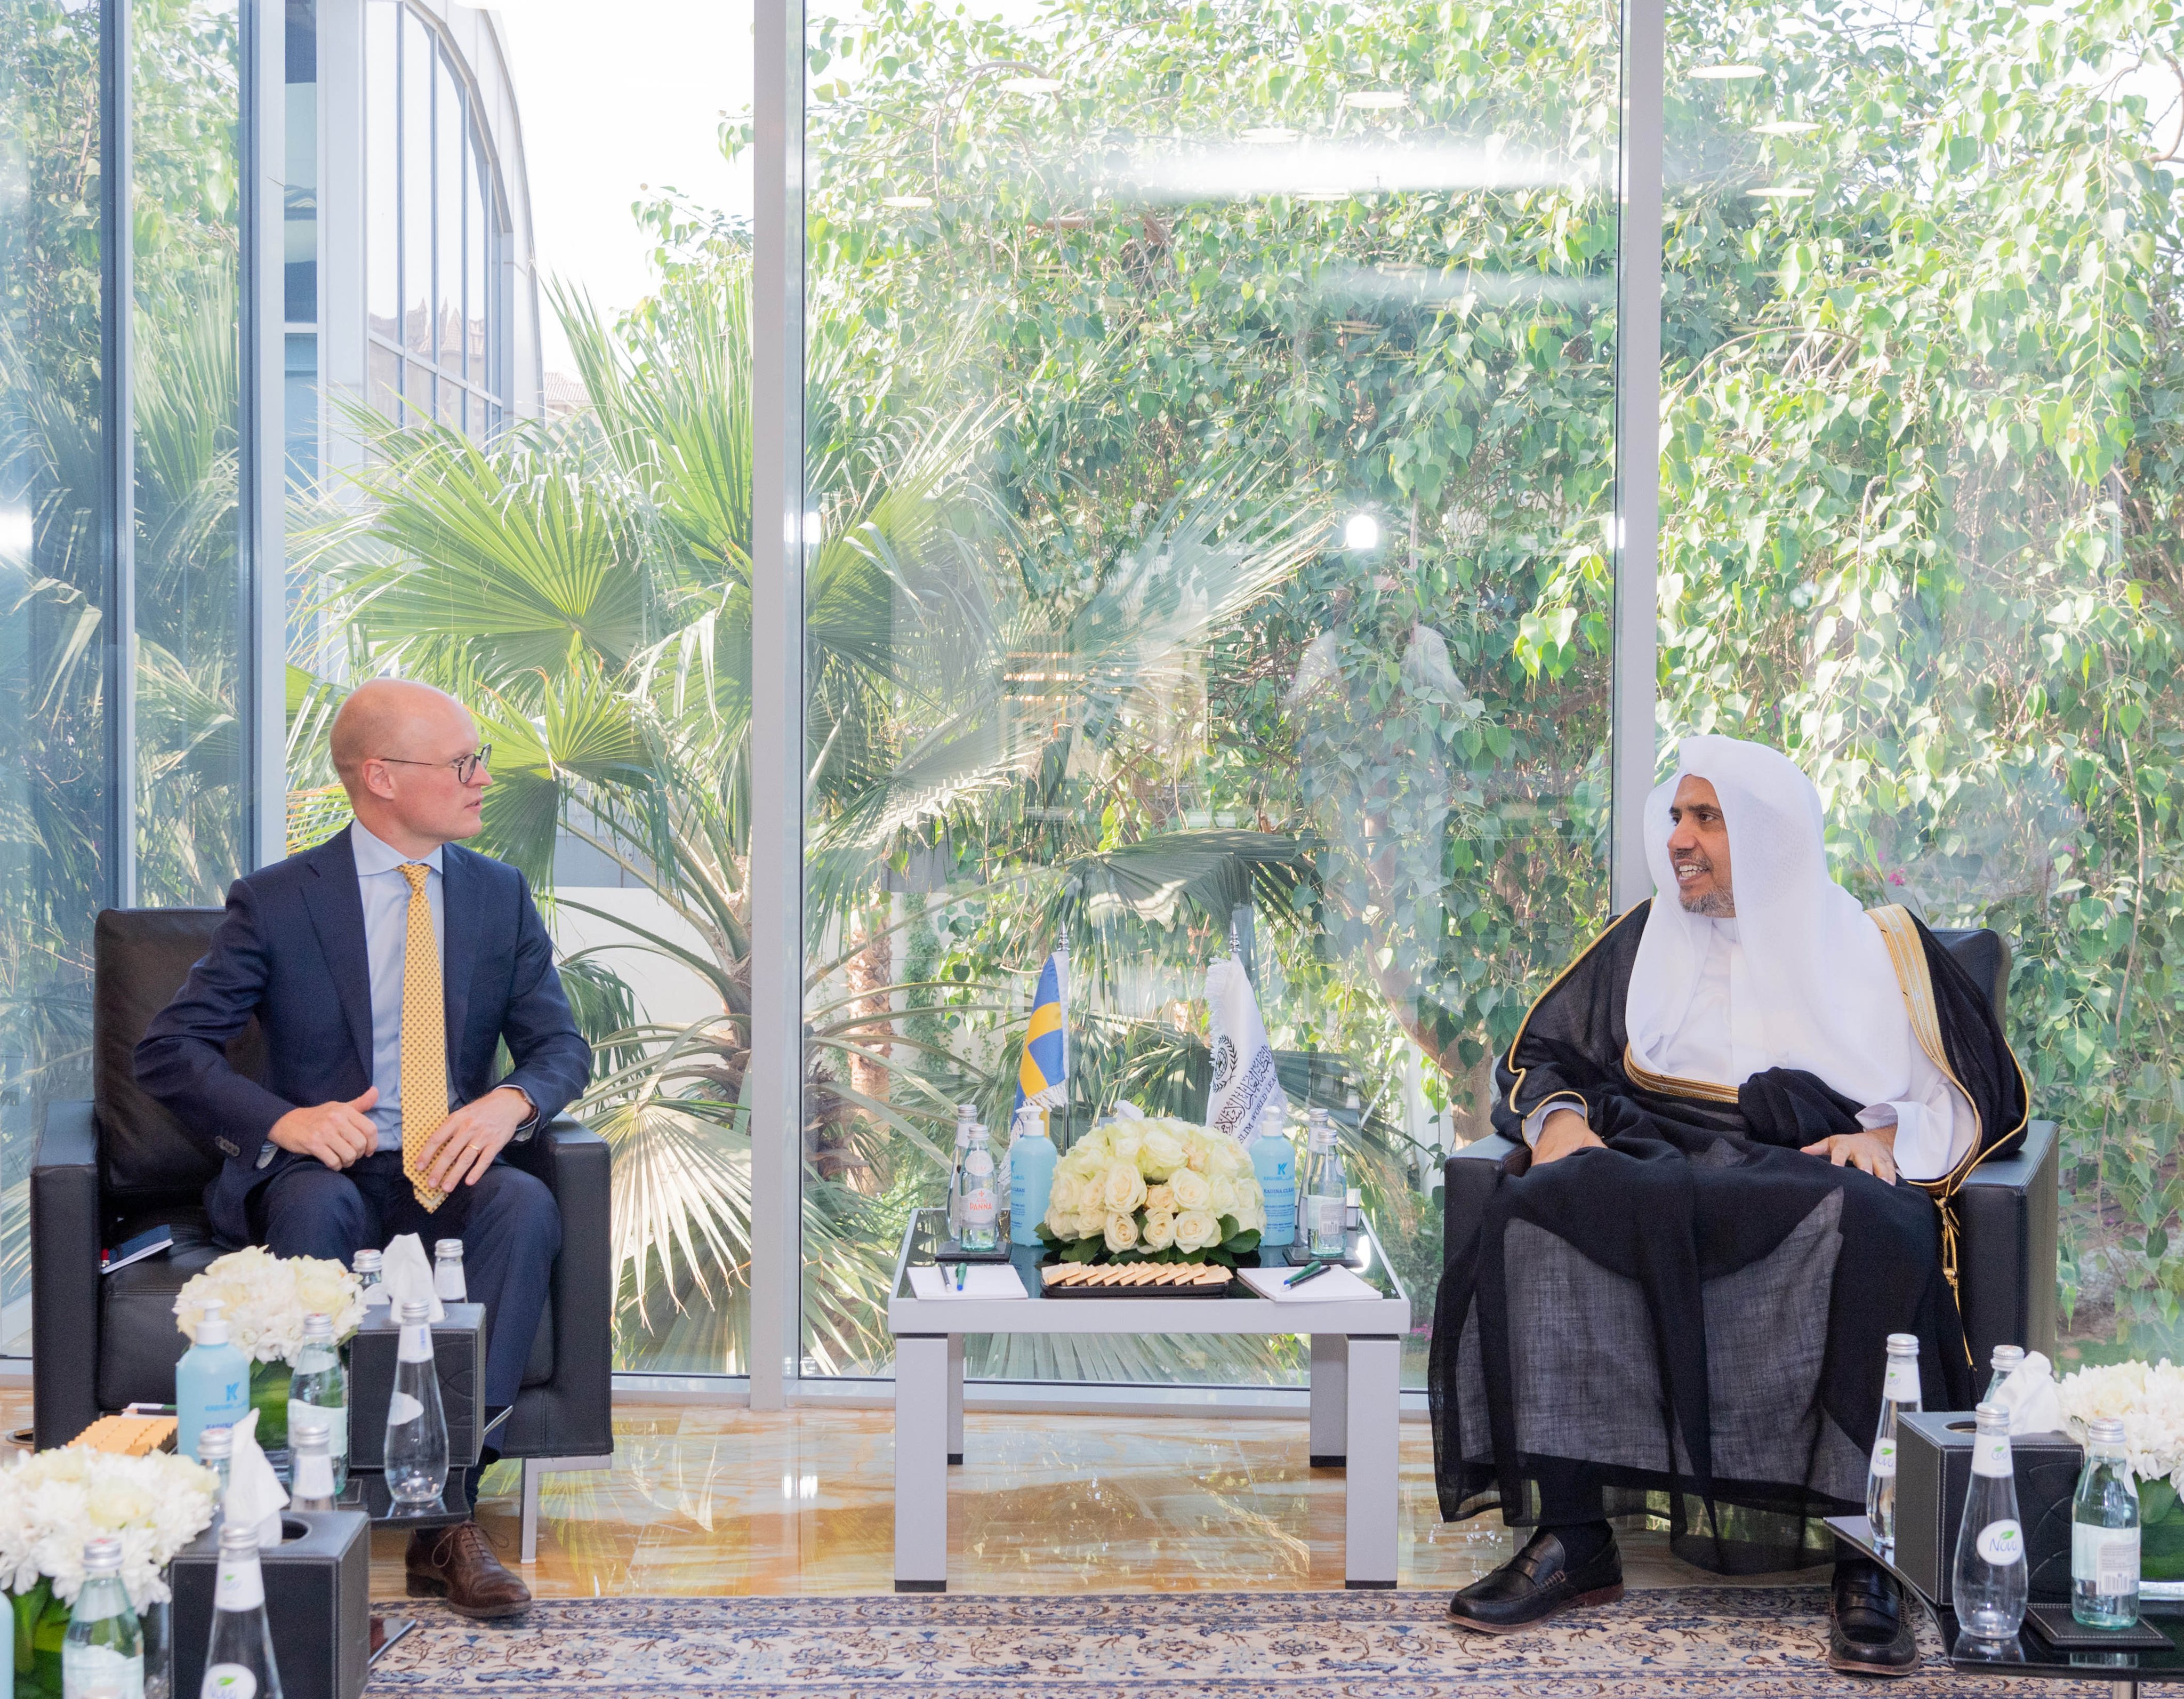 His Excellency Dr. Mohammad Alissa hosted the Chargé d'Affairs of the Embassy of Sweden to the Kingdom of Saudi Arabia